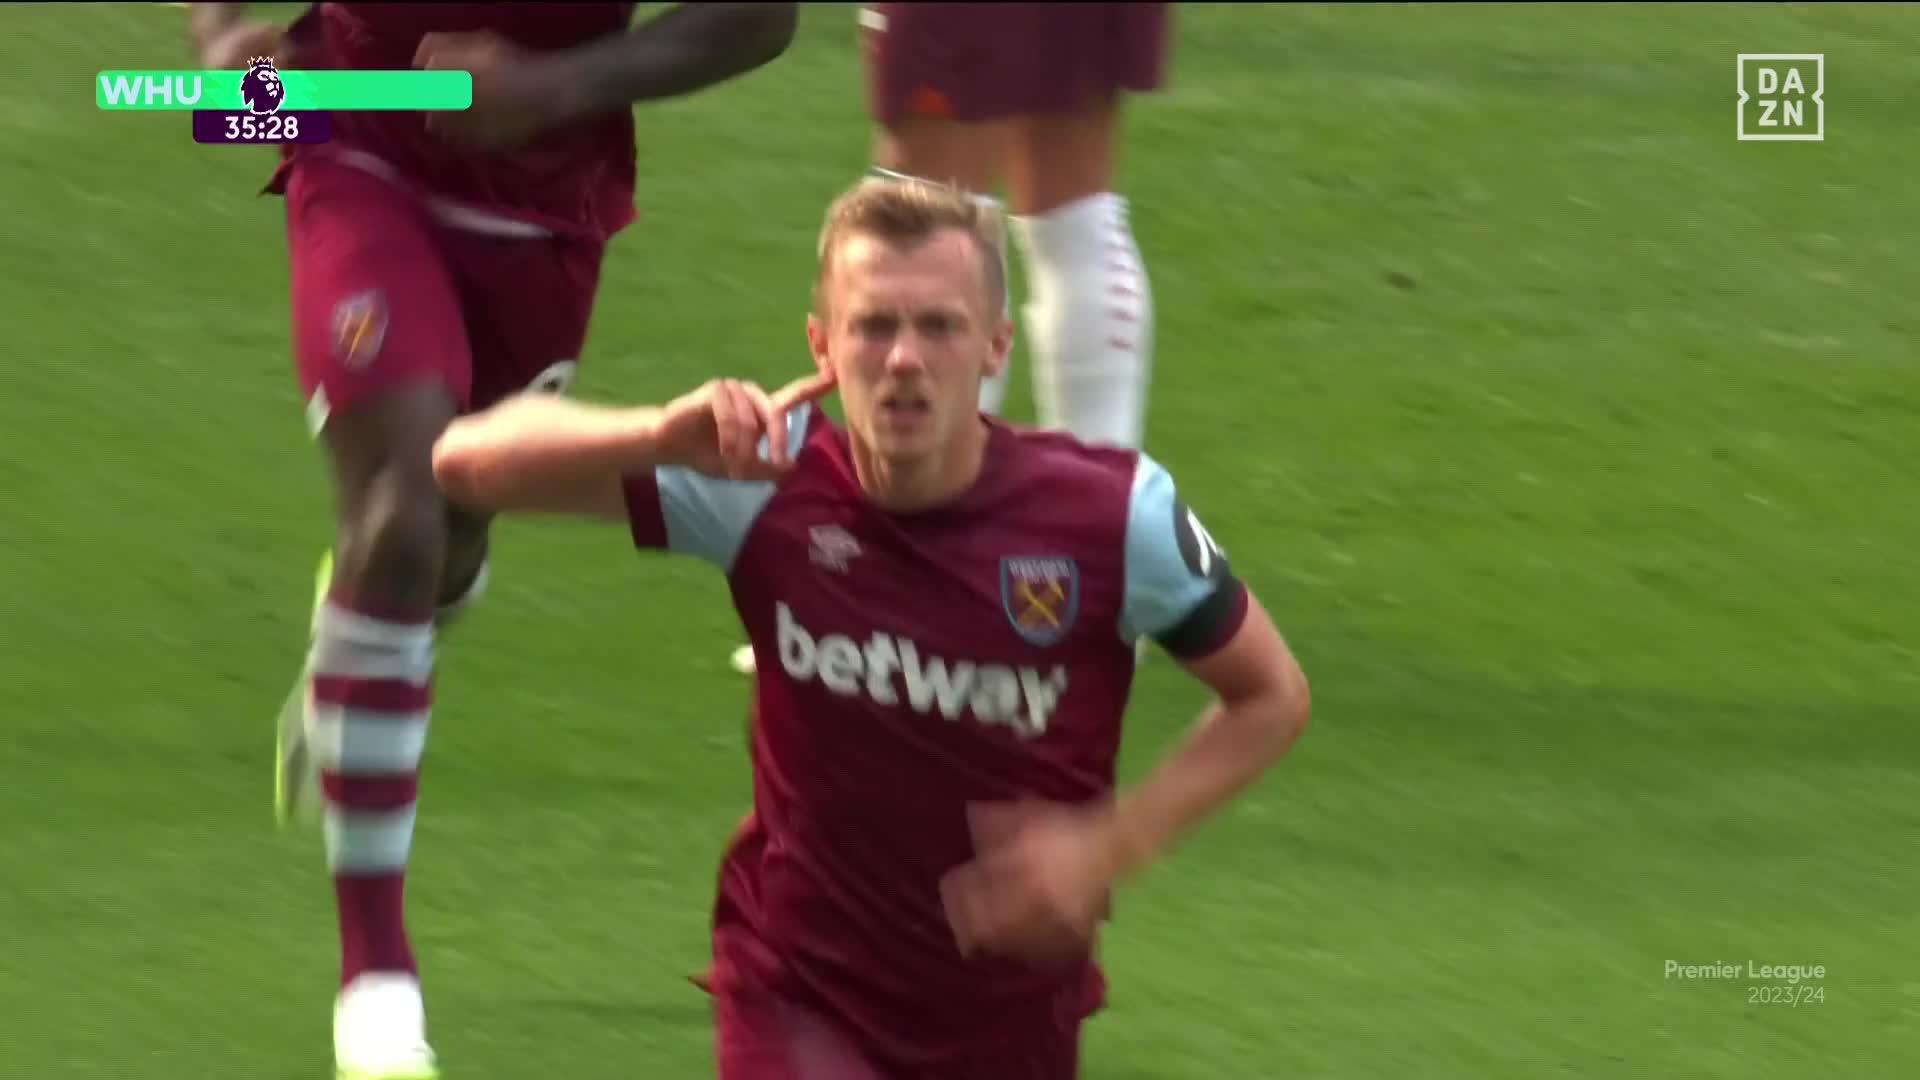 Ward-Prowse’s header gives West Ham lead over City